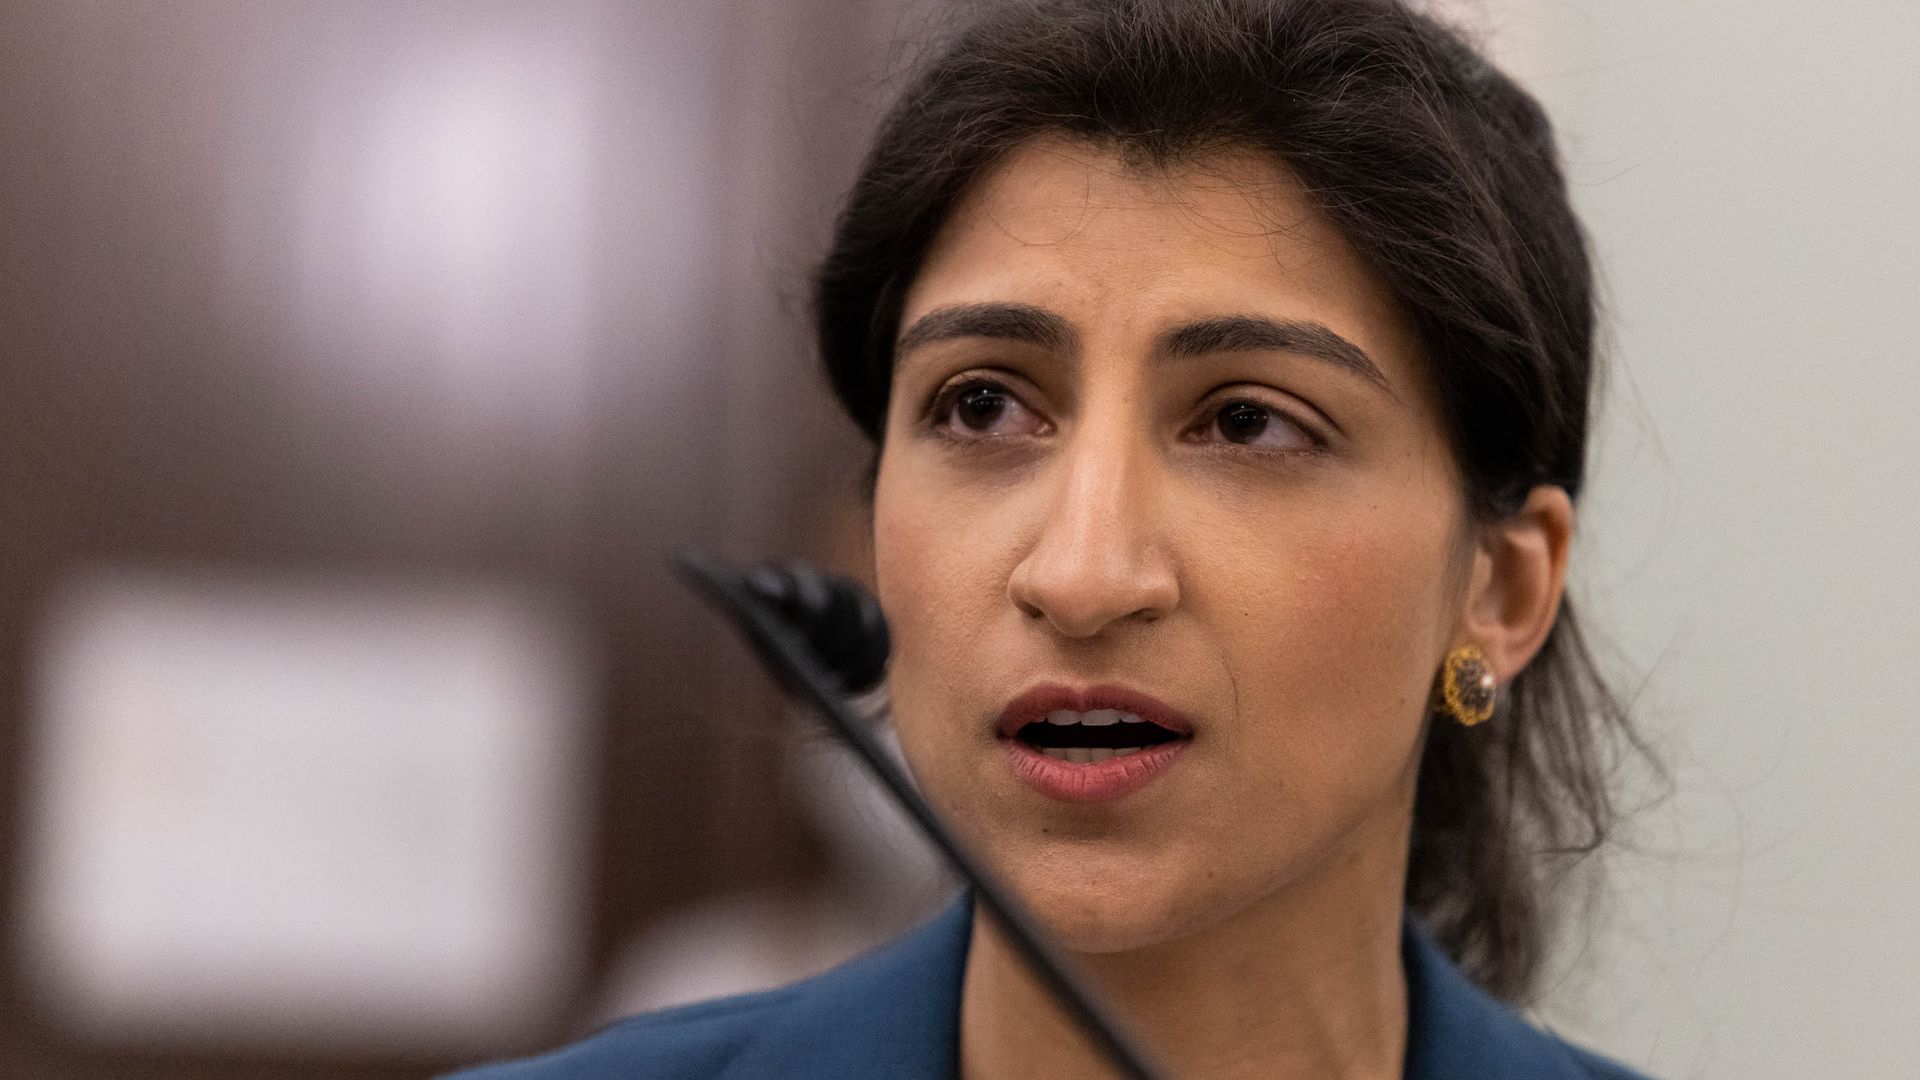 Lina Khan, commissioner of the Federal Trade Commission (FTC)  at a hearing in Washington, D.C., U.S. in 2021.